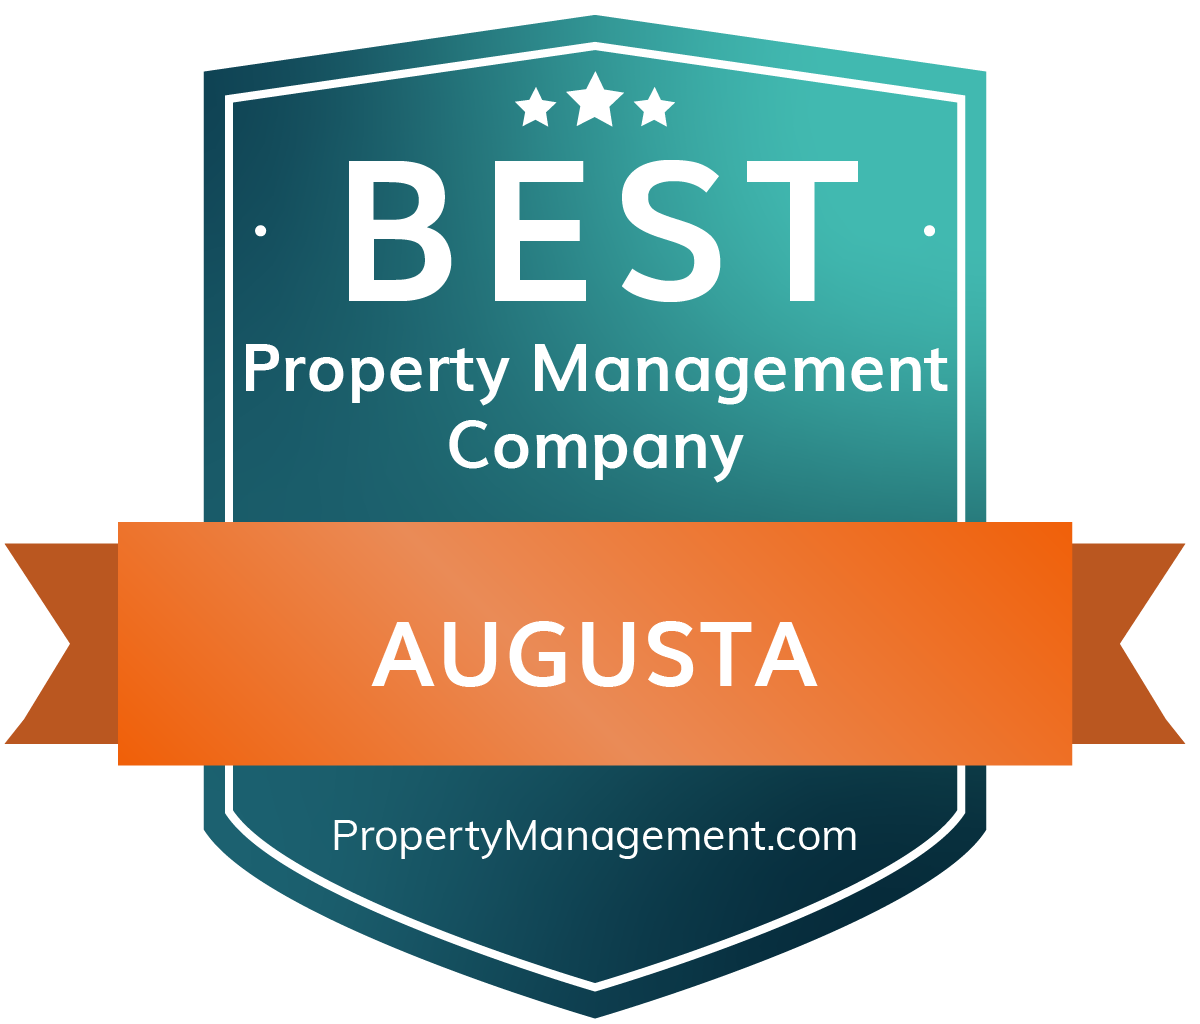 Best Property Management Companies in Augusta for 2022